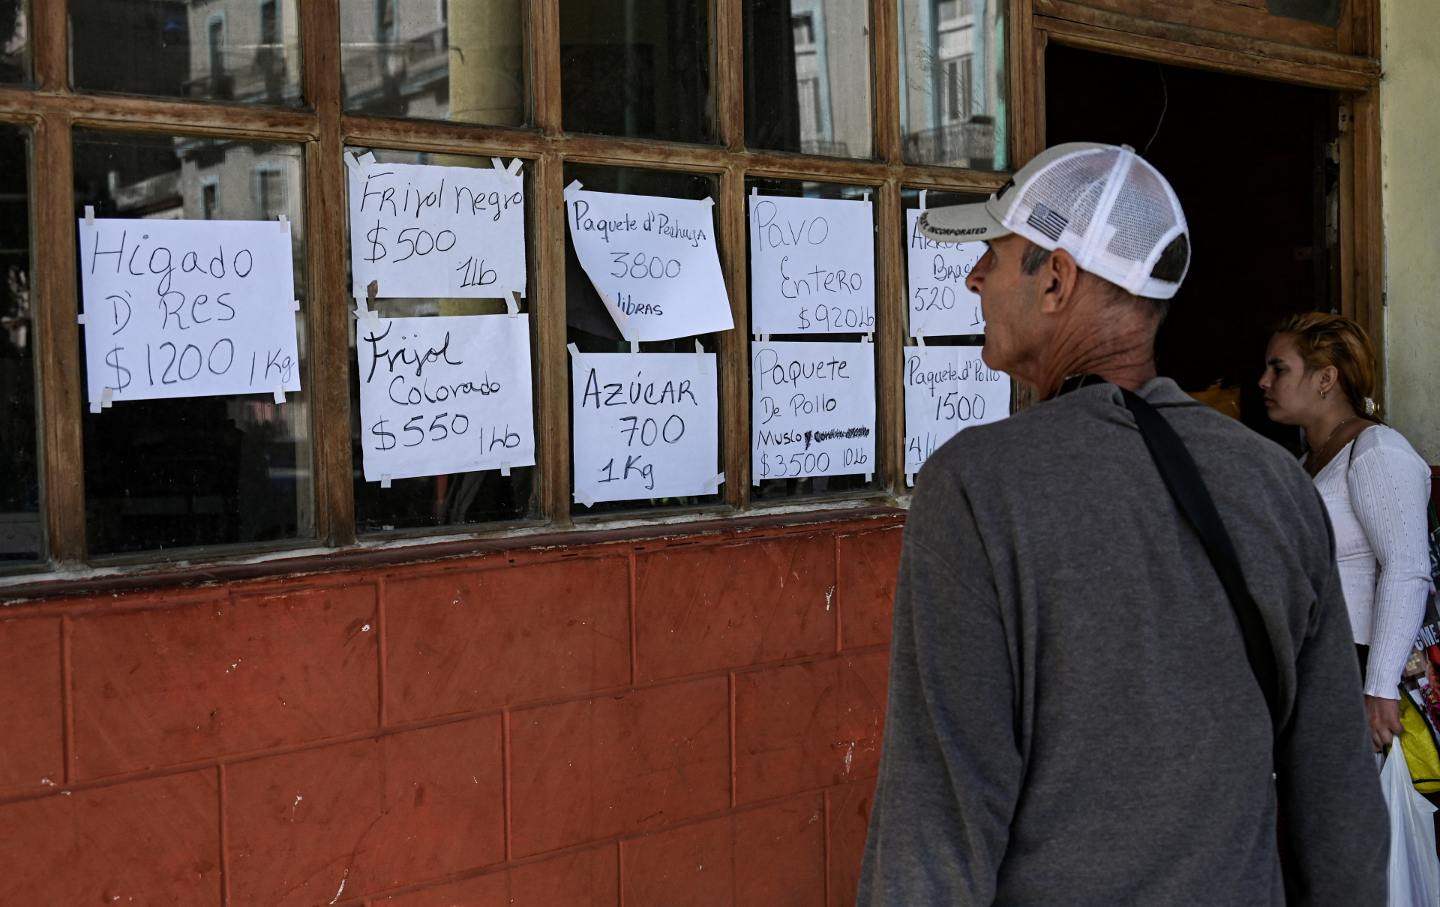 People look at food prices at a private business in Havana on December 20, 2023. Cuba's economy will shrink by up to 2 percent this year, Finance Minister Alejandro Gil estimated on Wednesday, after acknowledging that the country will not be able to achieve the projected economic growth of 3 percent by 2023.